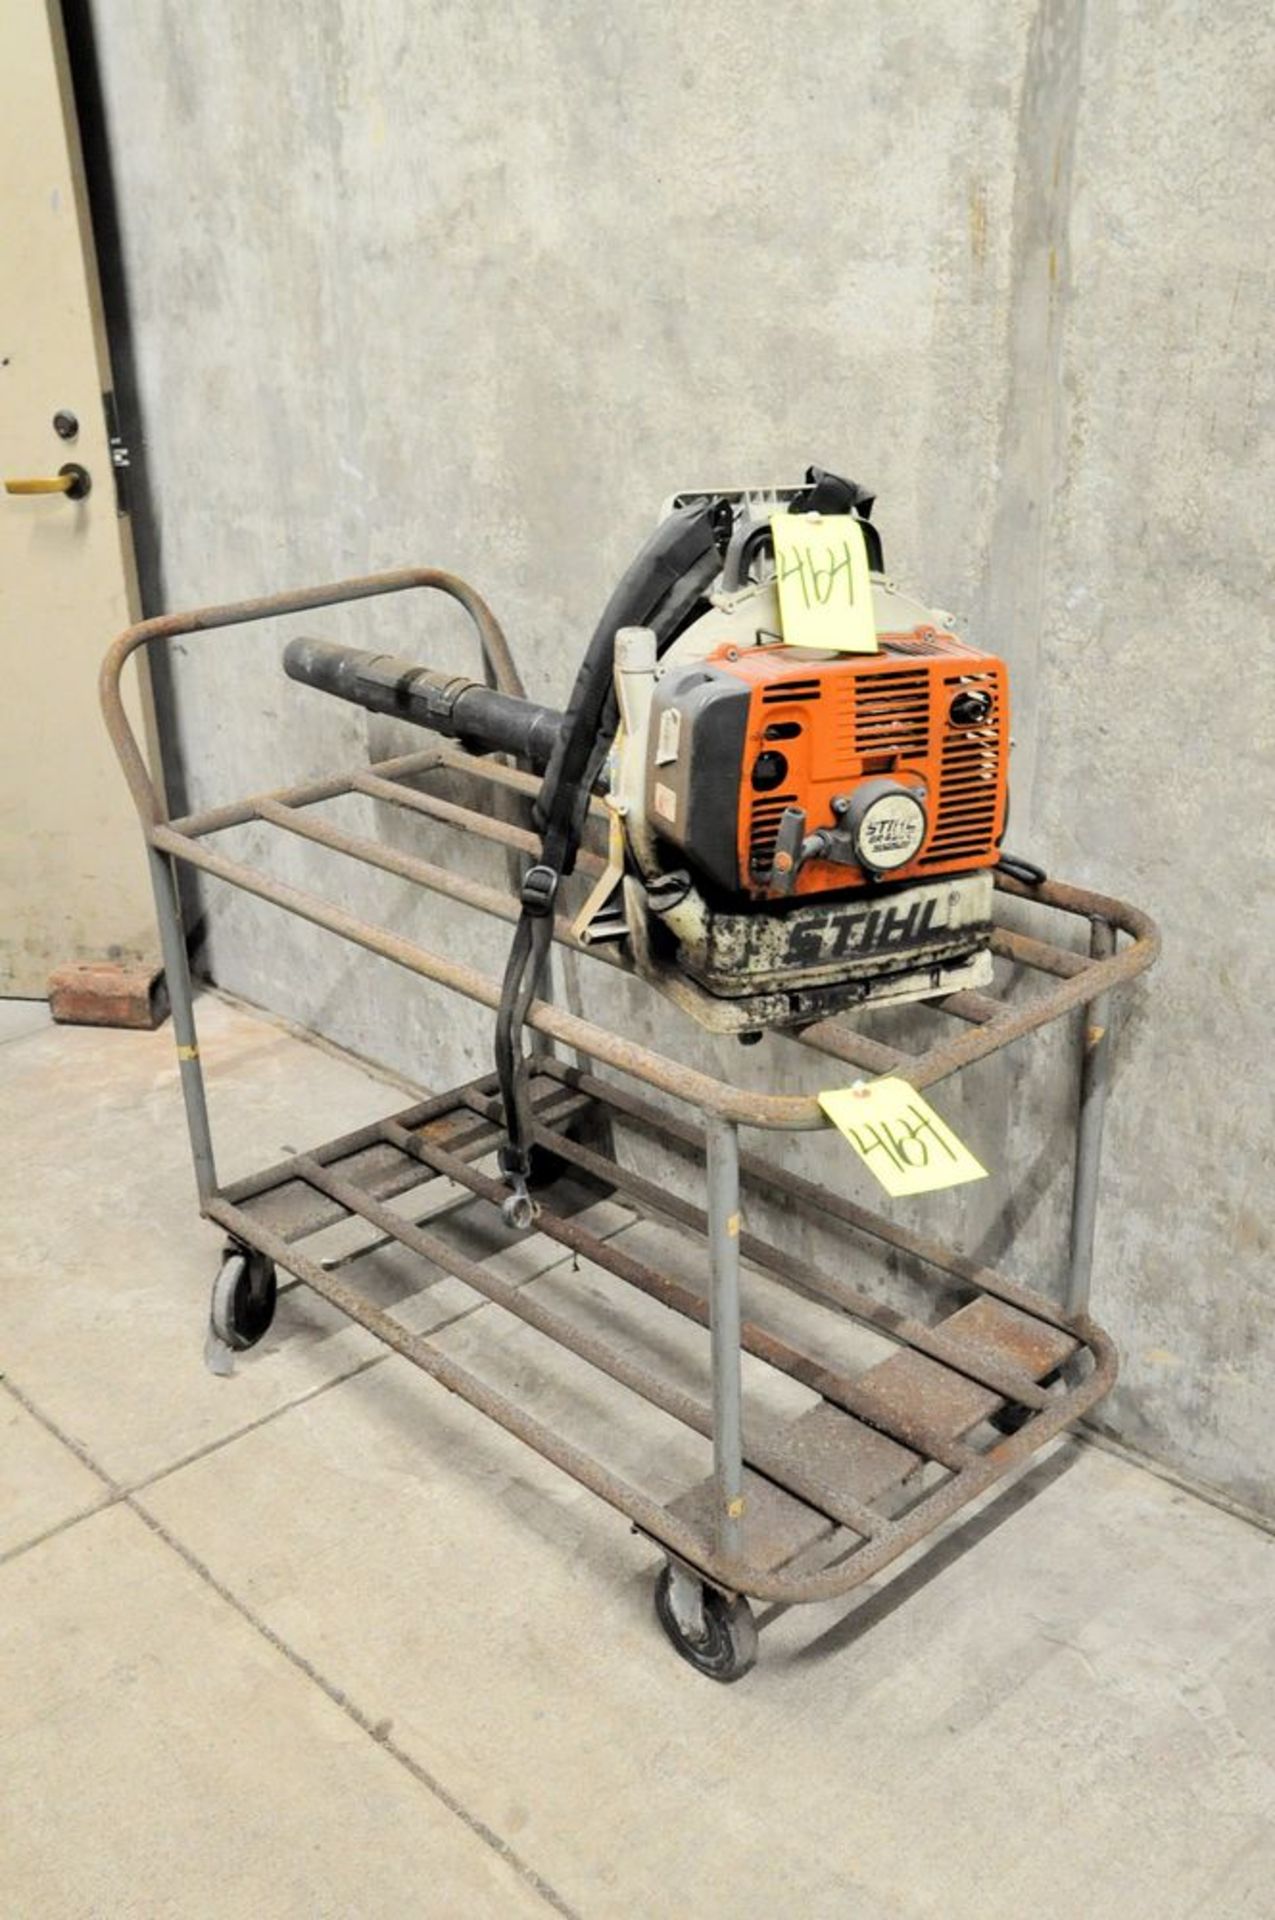 Lot-(1) Stihl Gas Powered Backpack Leaf Blower with Cart, (Maintenance/Boiler Room P217), (P2